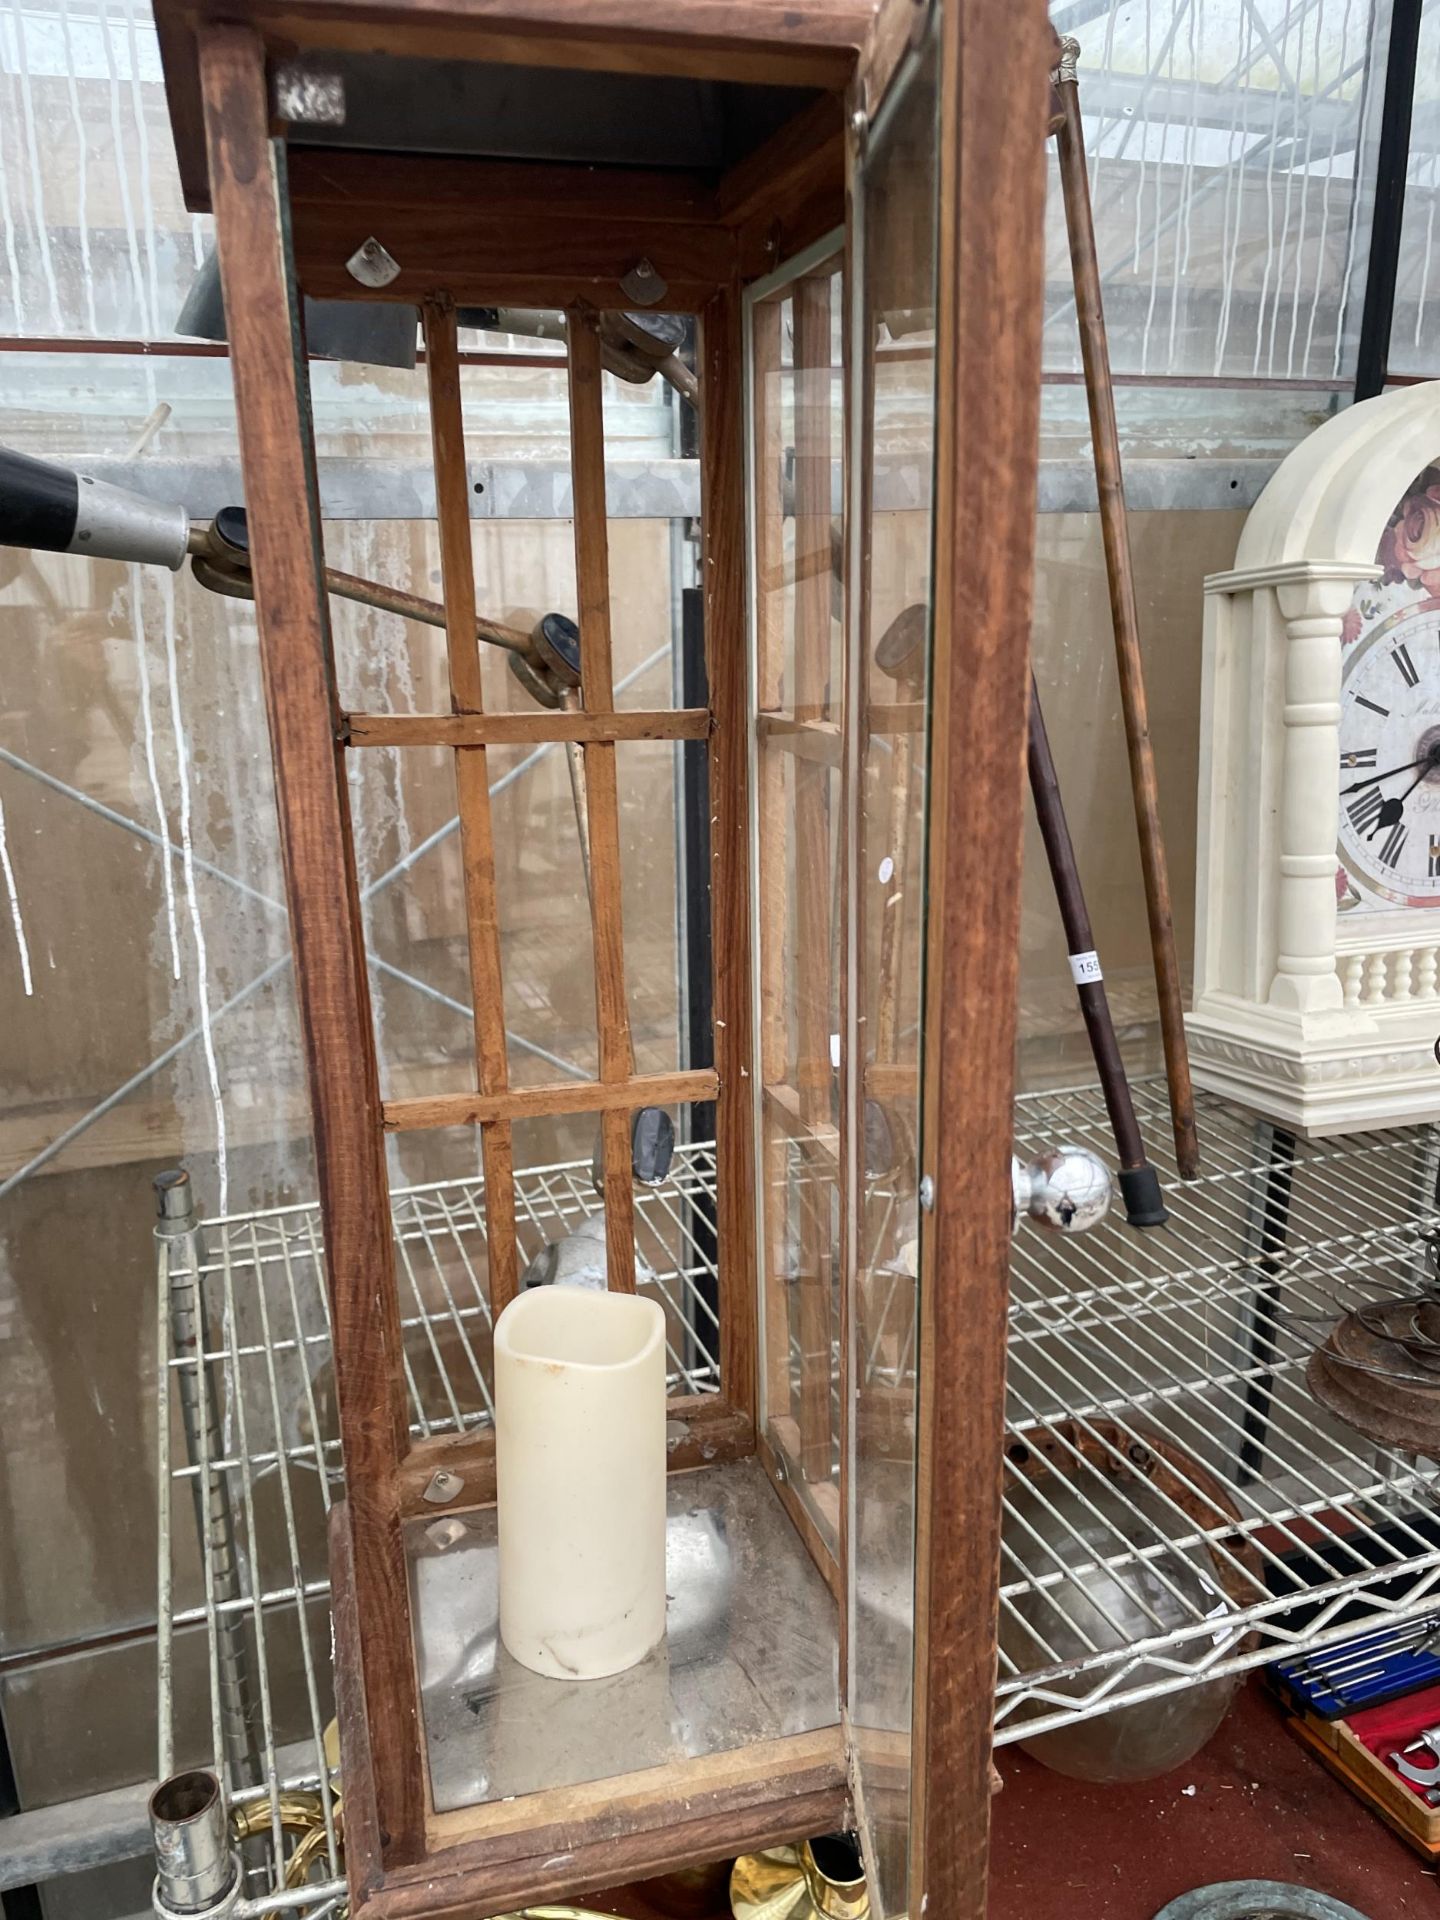 A LARGE VINTAGE STYLE WOODEN CANDLE LANTERN - Image 4 of 4